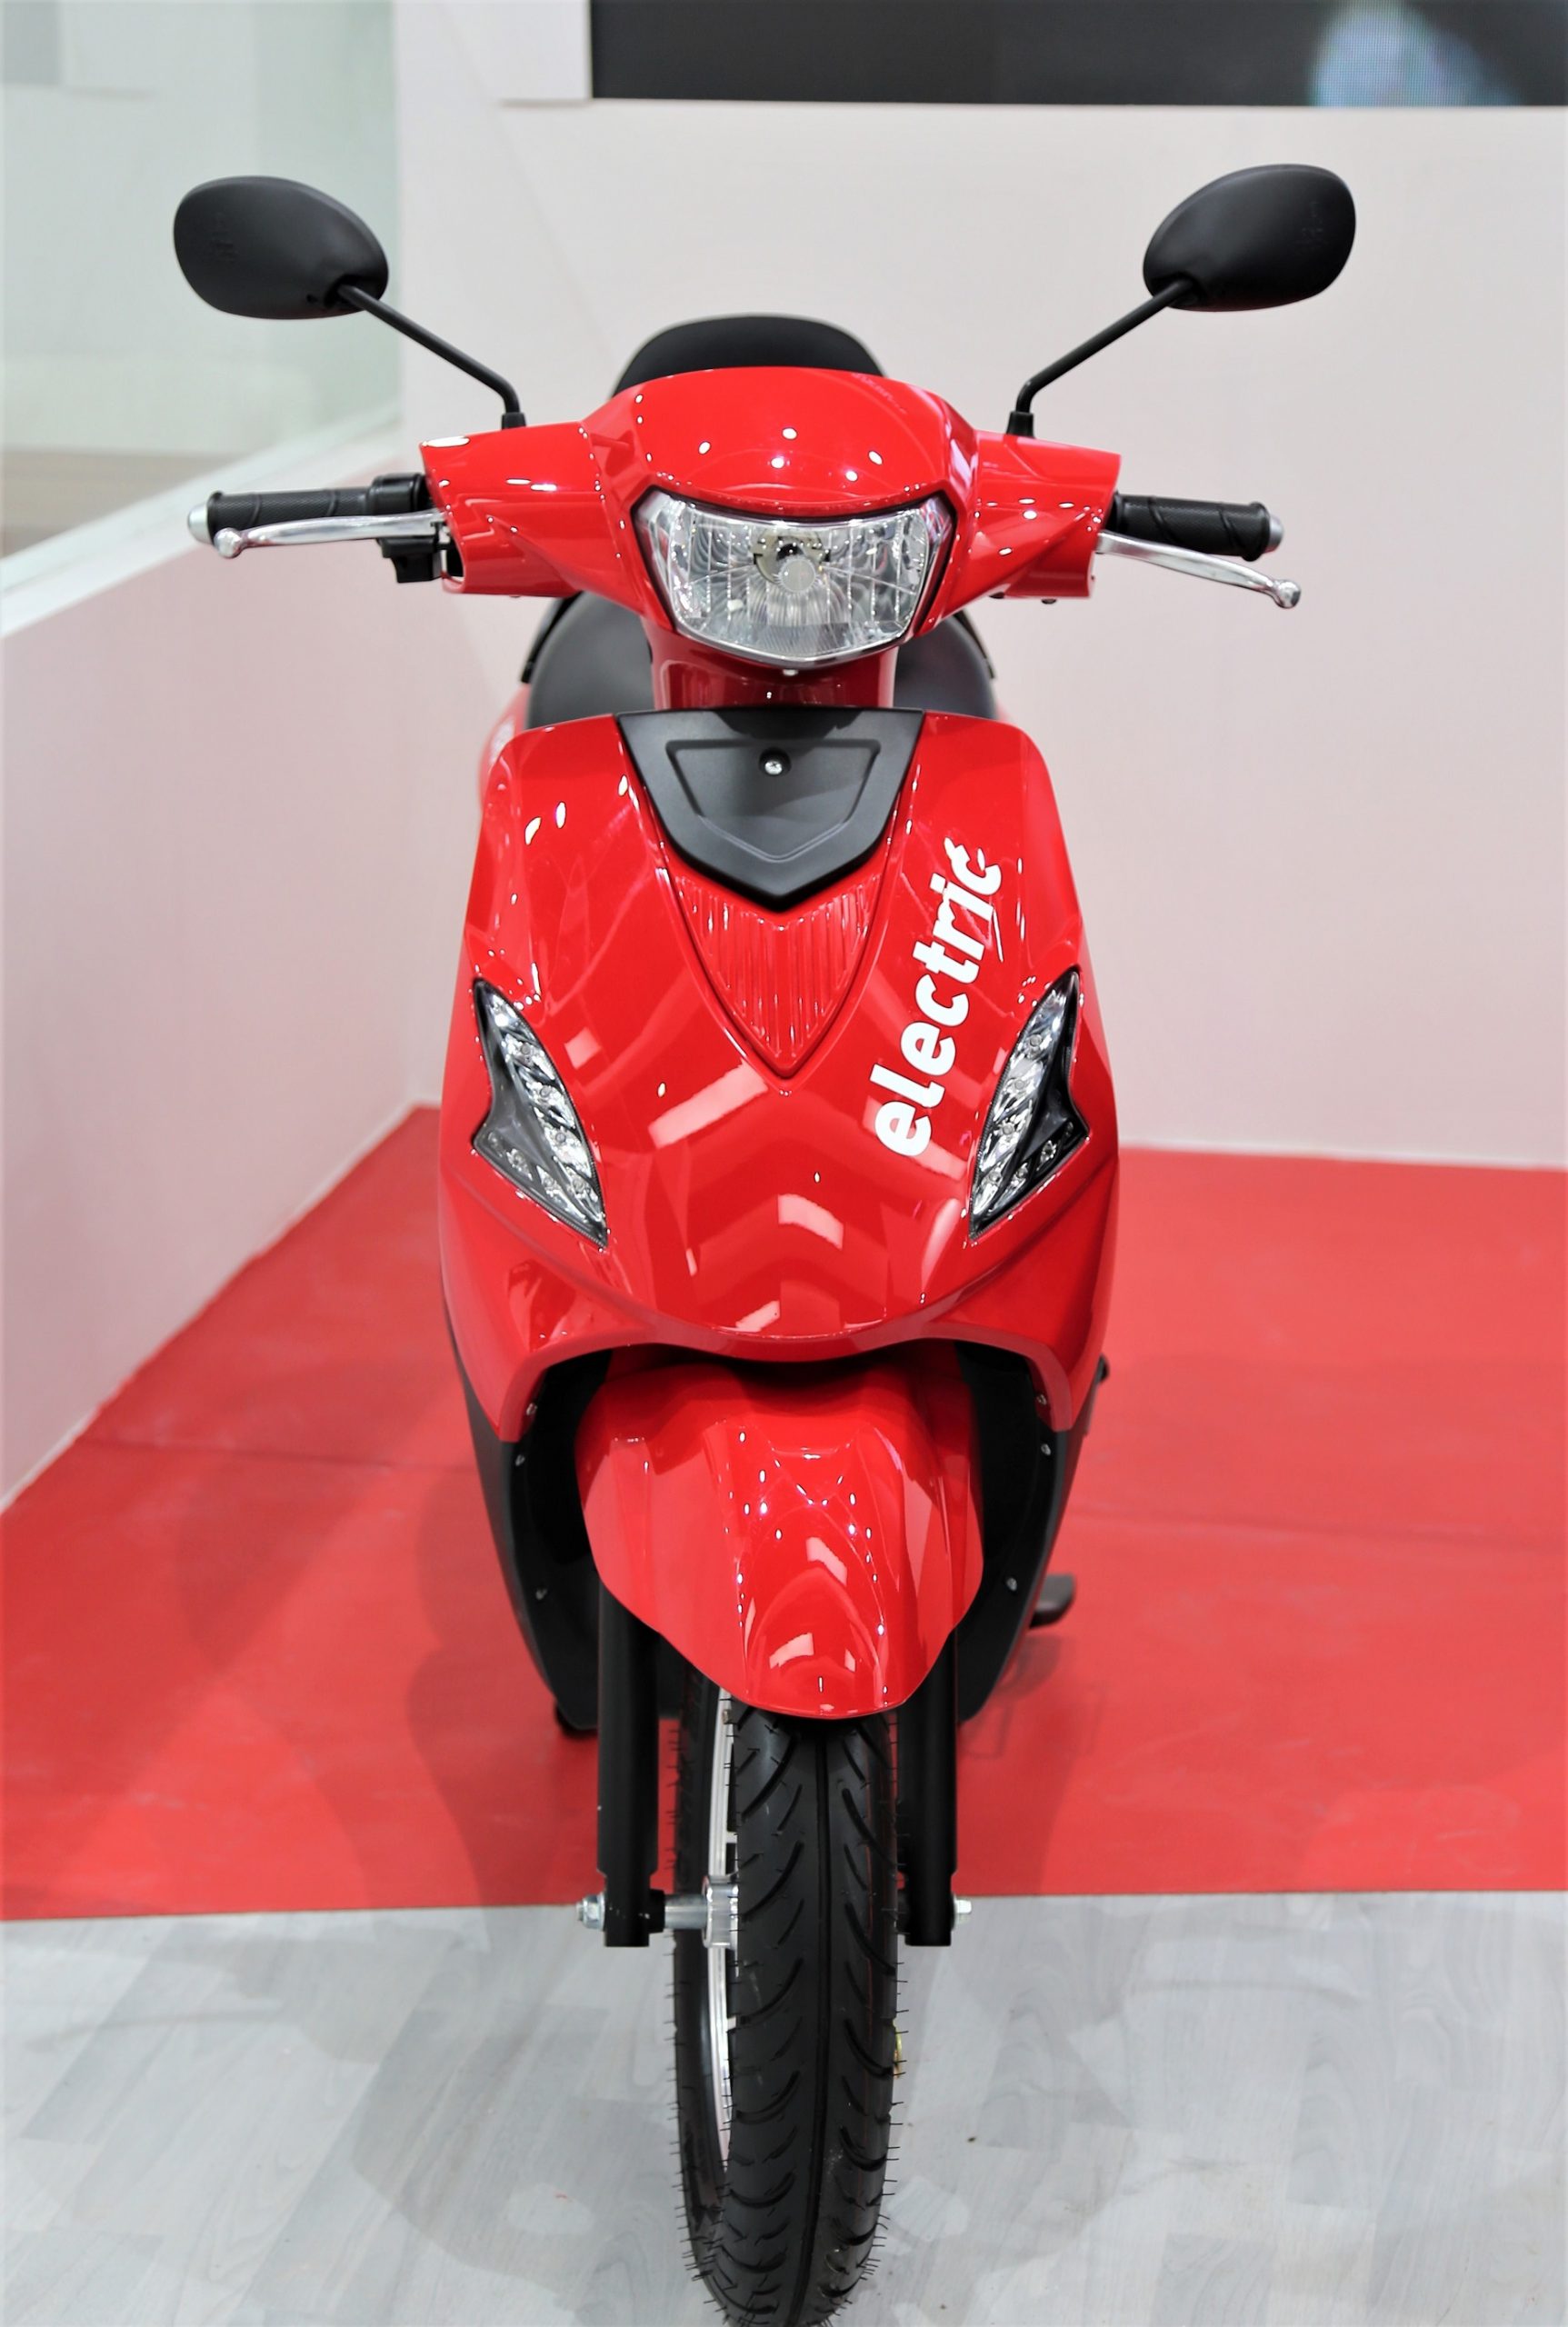 Hero Electric Showcases Electric Motorcycle And Scooters At Auto Expo Techvorm